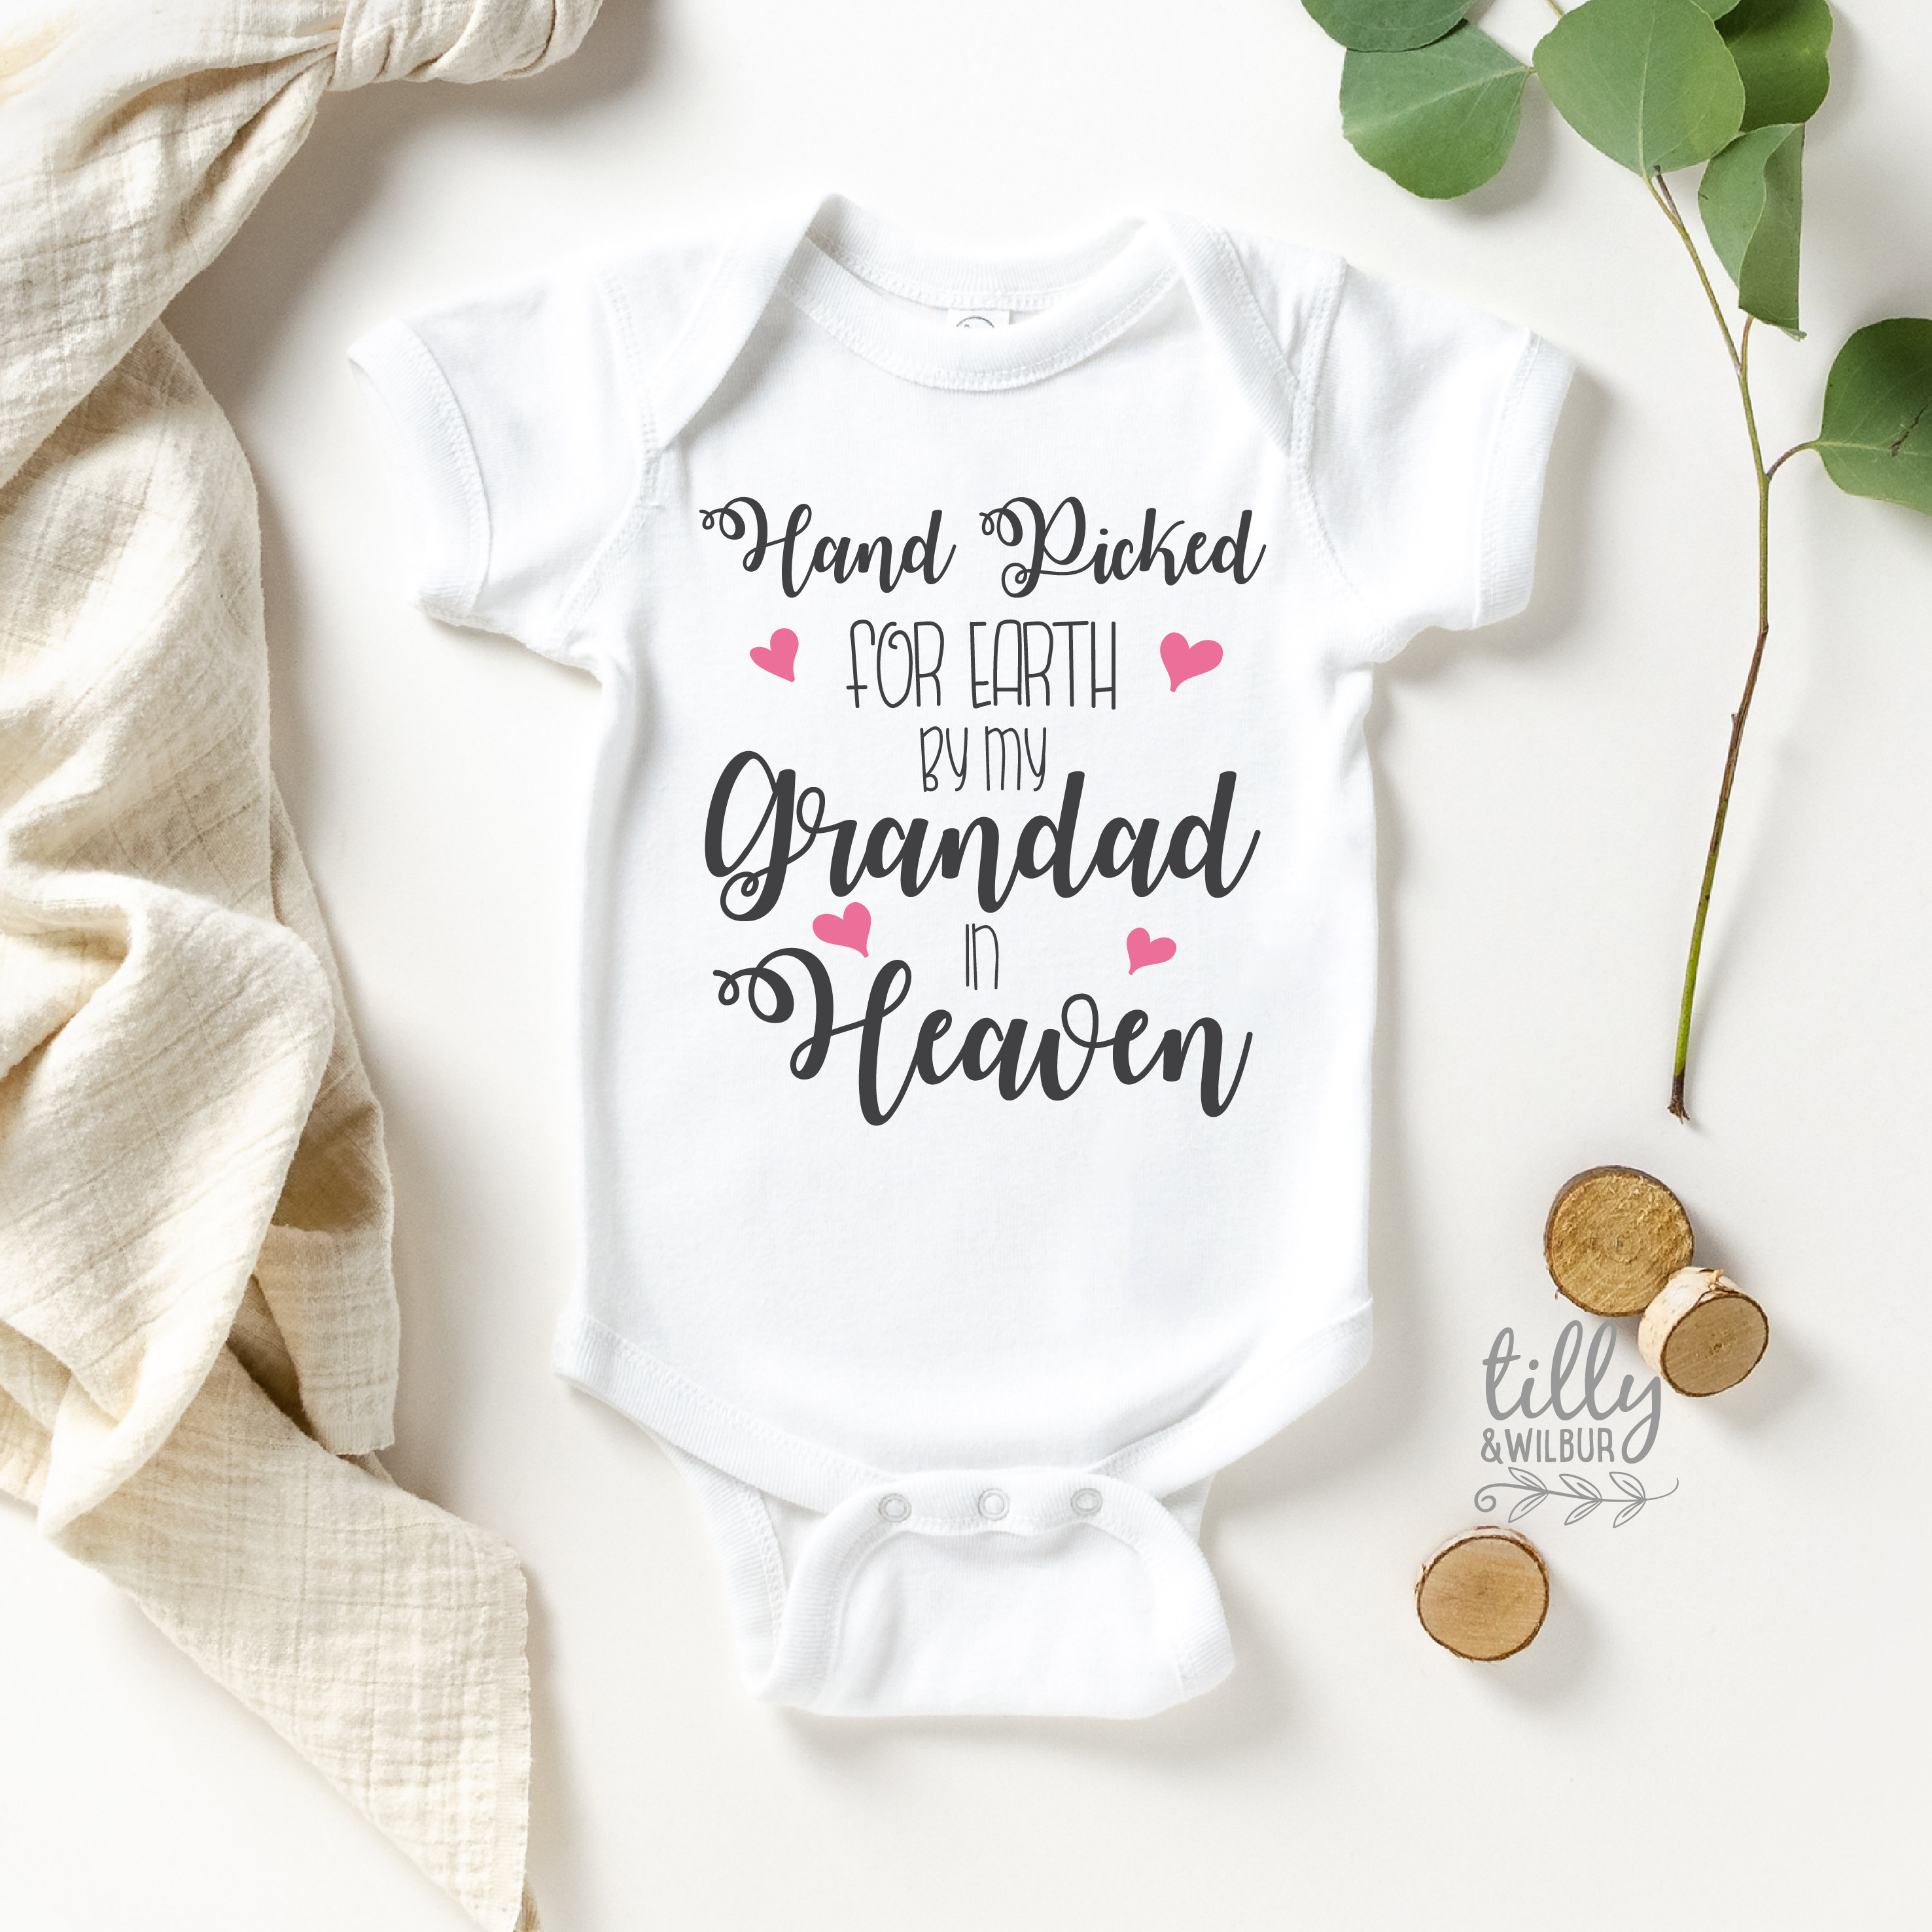 Embroidered Bodysuit Handpicked for Earth by my Siblings in Heaven Baby Shower Gift Hand Picked Bodysuit 